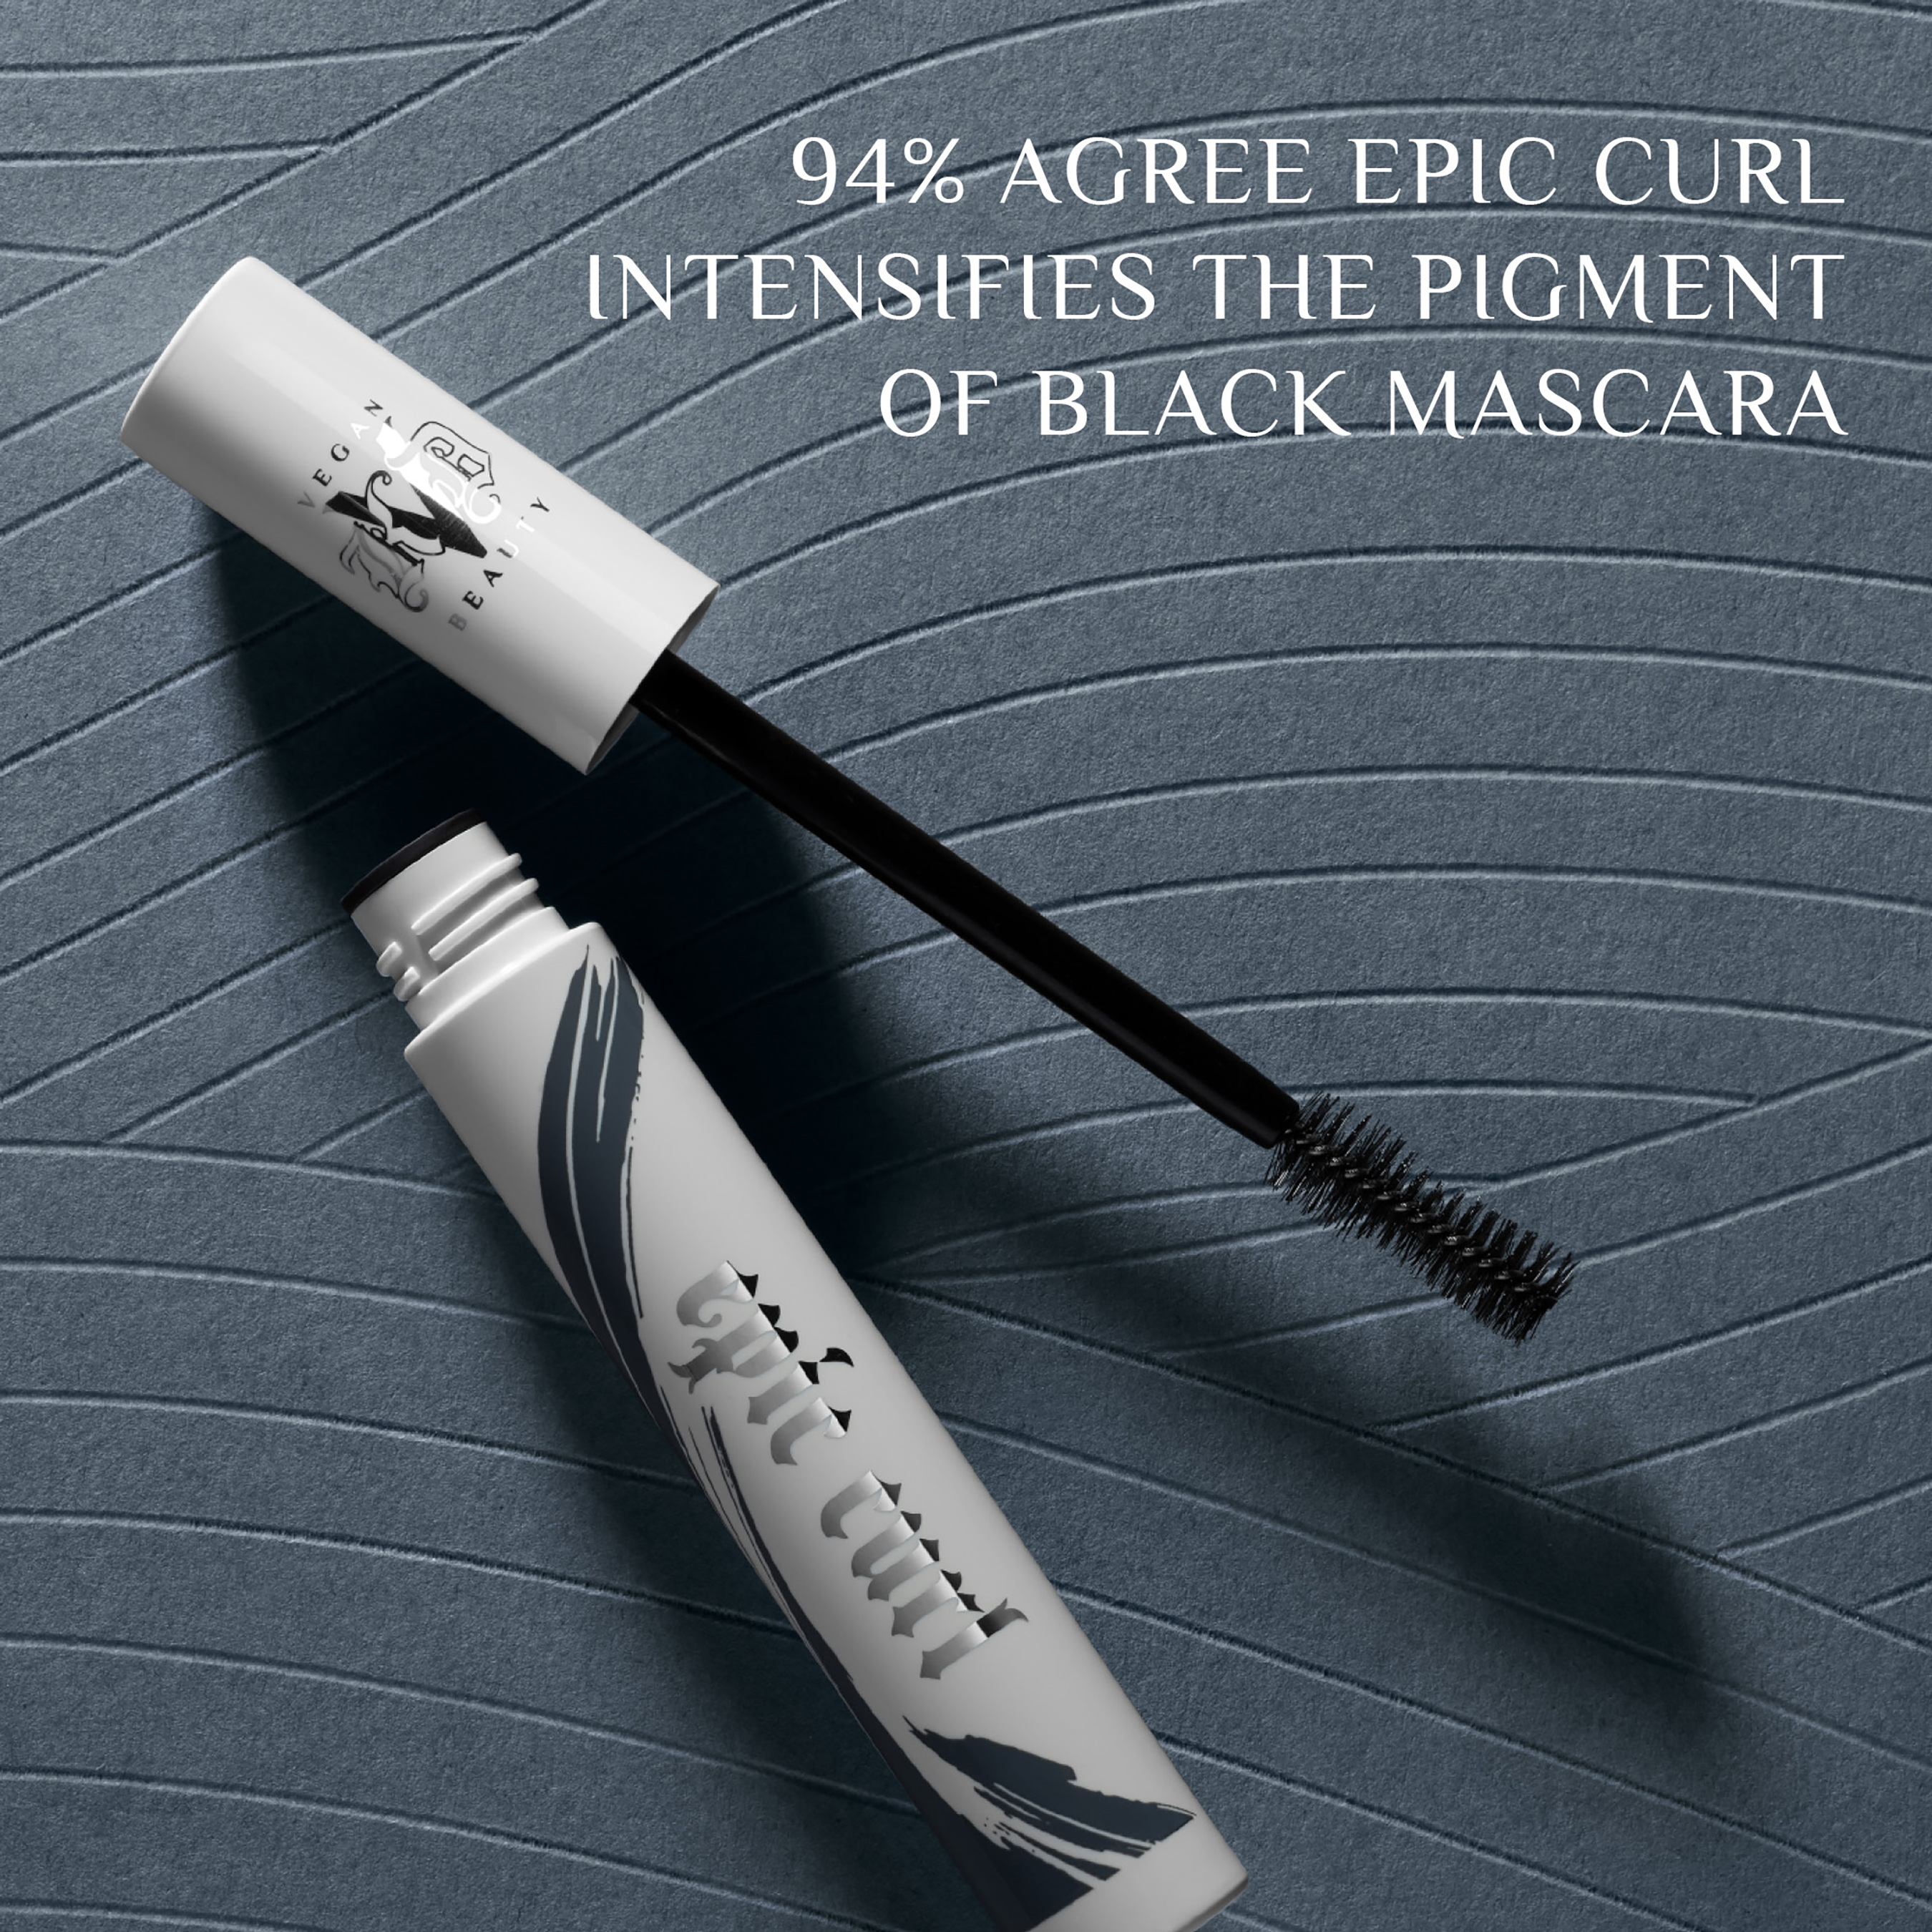 94% of people agree that KVD Vegan Beauty Epic Curl intensified the pigment of black mascara